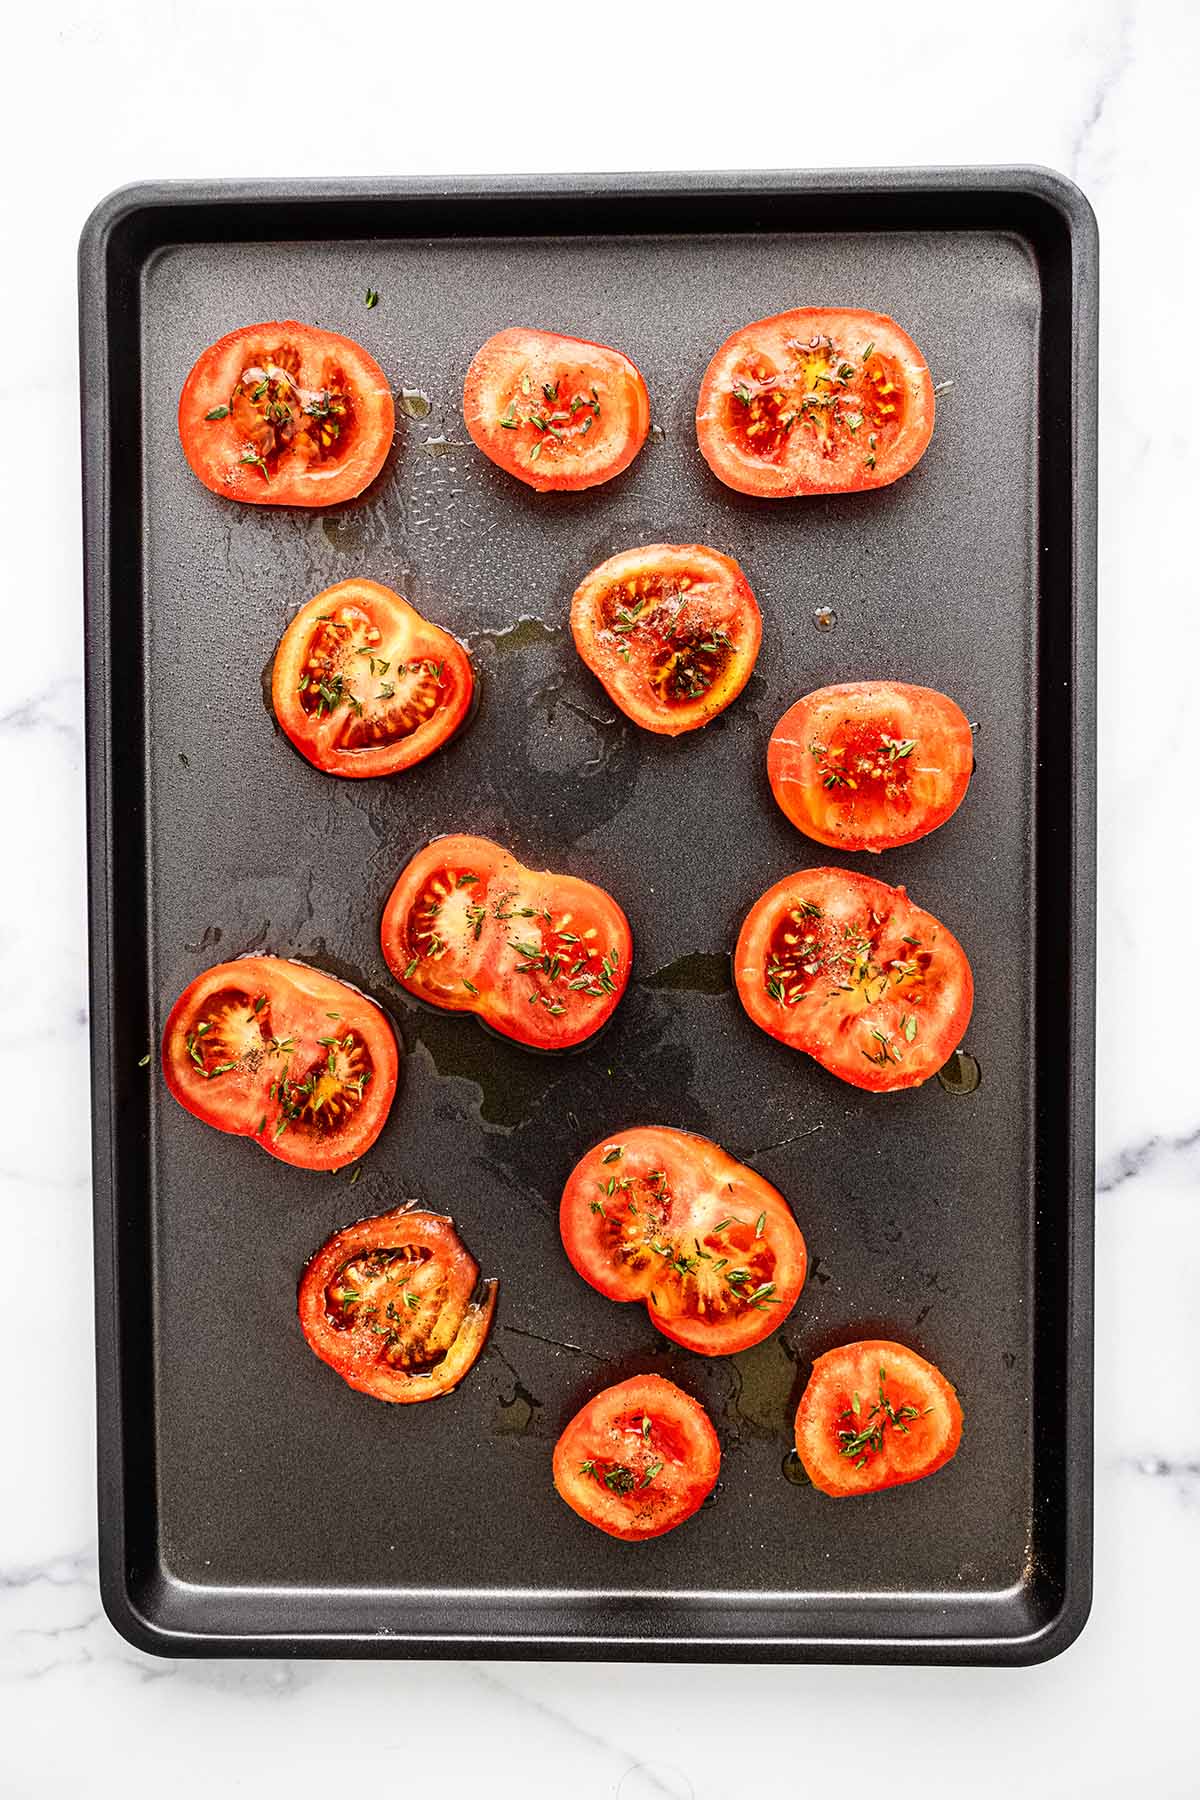 Tomato slices spread out on a baking sheet.